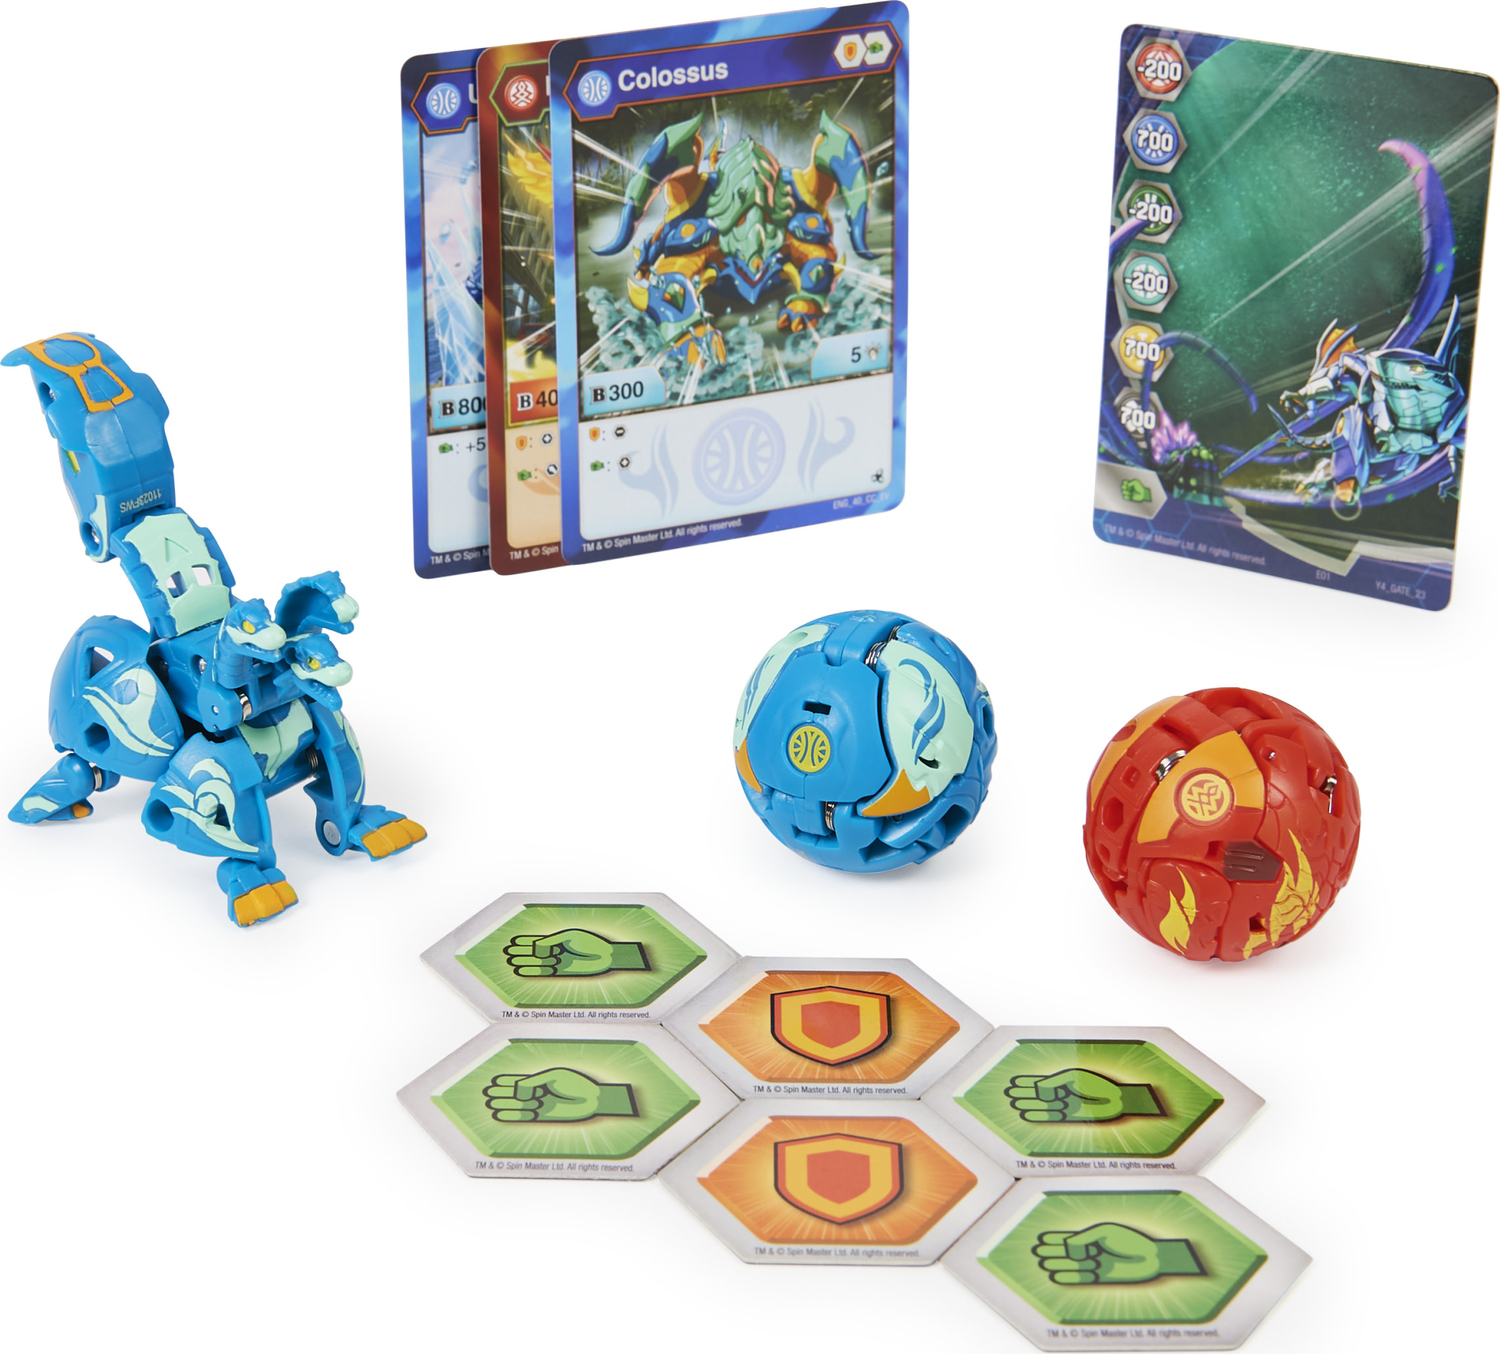 Bakugan Evolutions Starter Pack 3-Pack, Howlkor Ultra with Colossus and Pegatrix, Collectible Action Figures, Ages 6 and Up